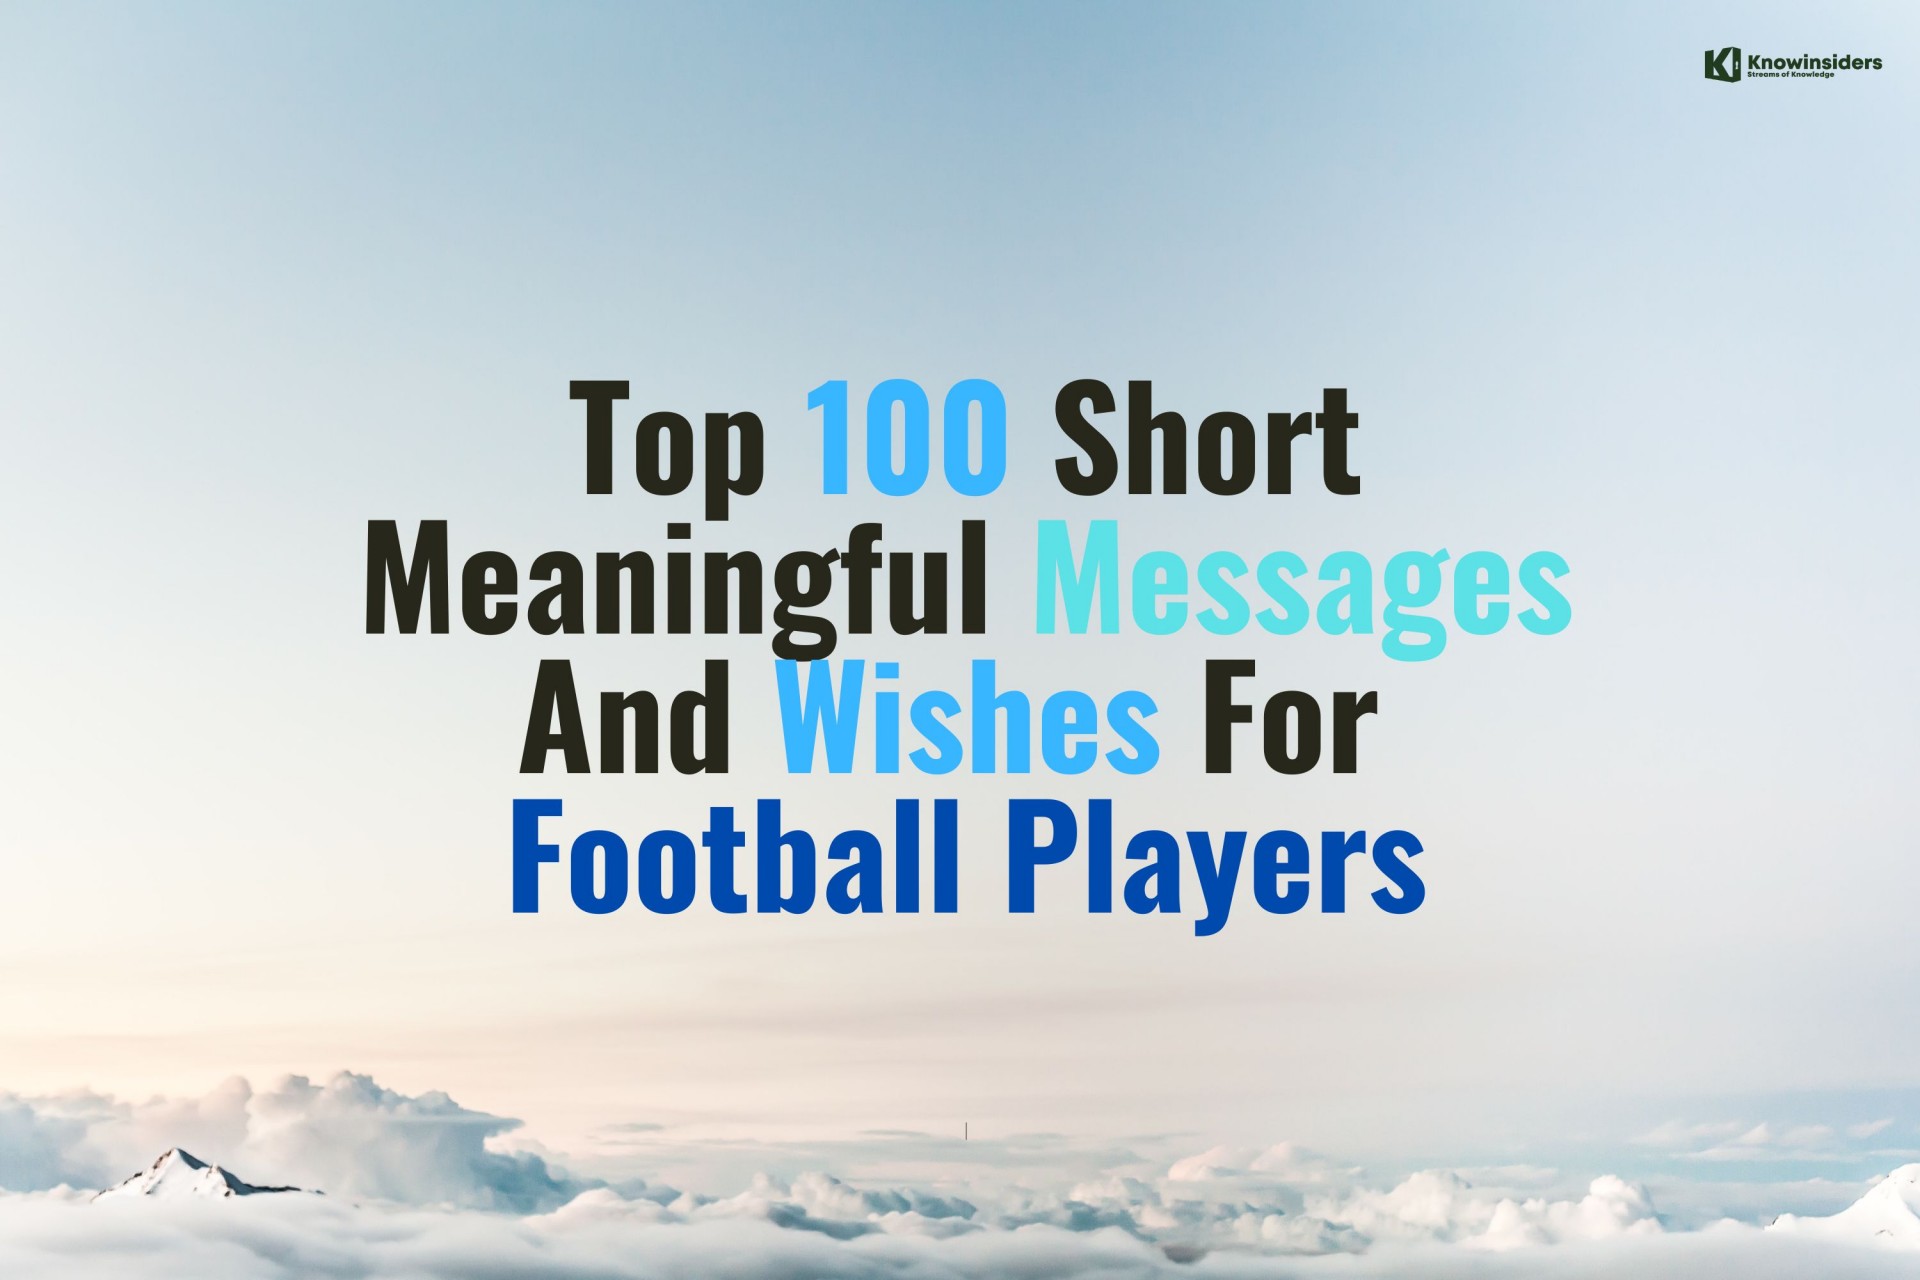 Top 100 Short Meaningful Messages And Wishes For Football Players